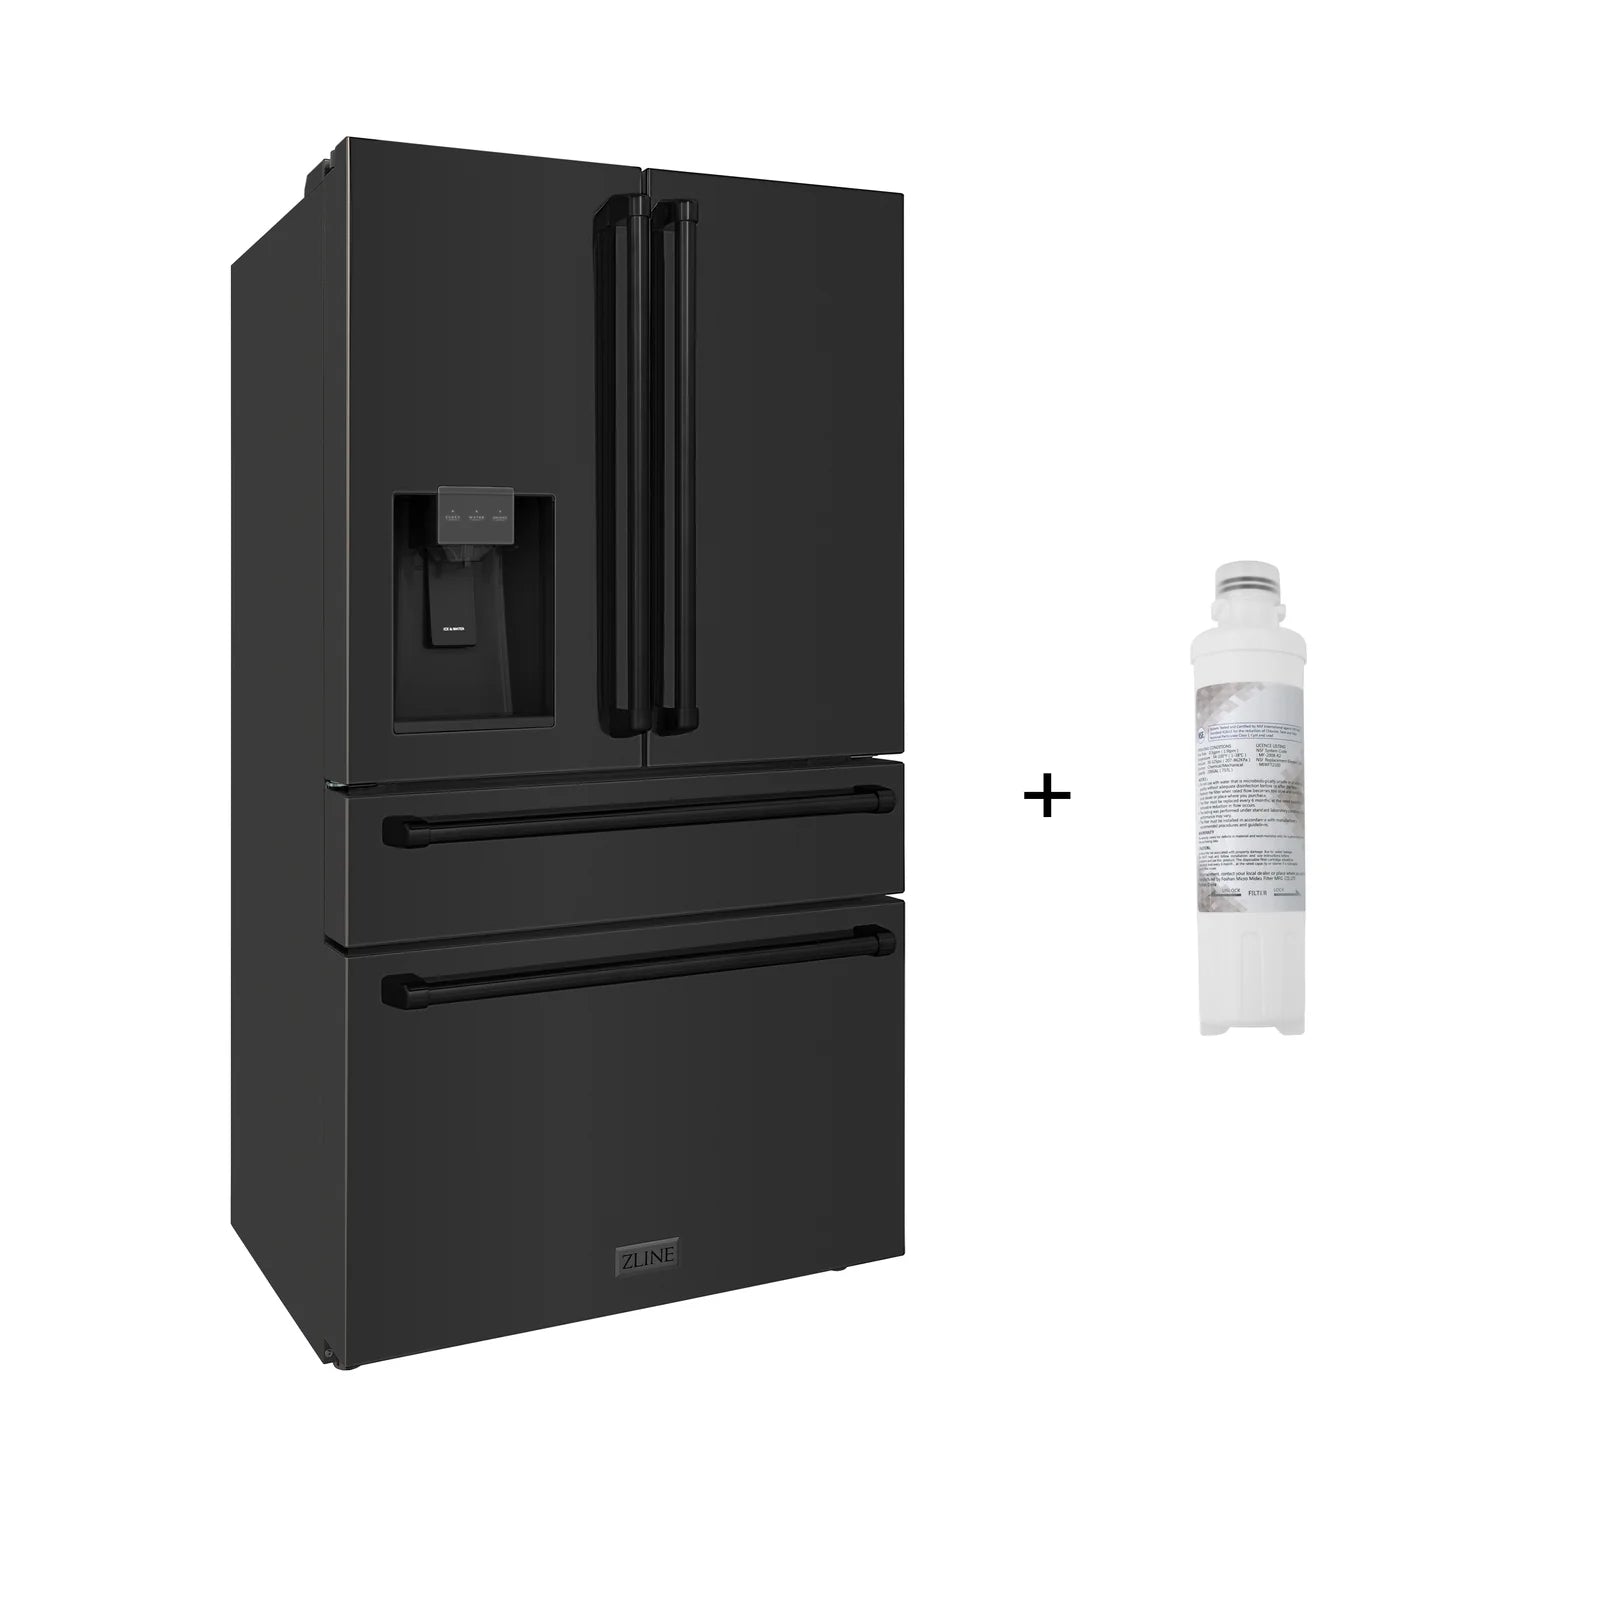 ZLINE 36-Inch 21.6 cu. ft. 4-Door French Door Refrigerator with Water and Ice Dispenser and Water Filter in Fingerprint Resistant Black Stainless Steel - RFM-W-WF-36-BS